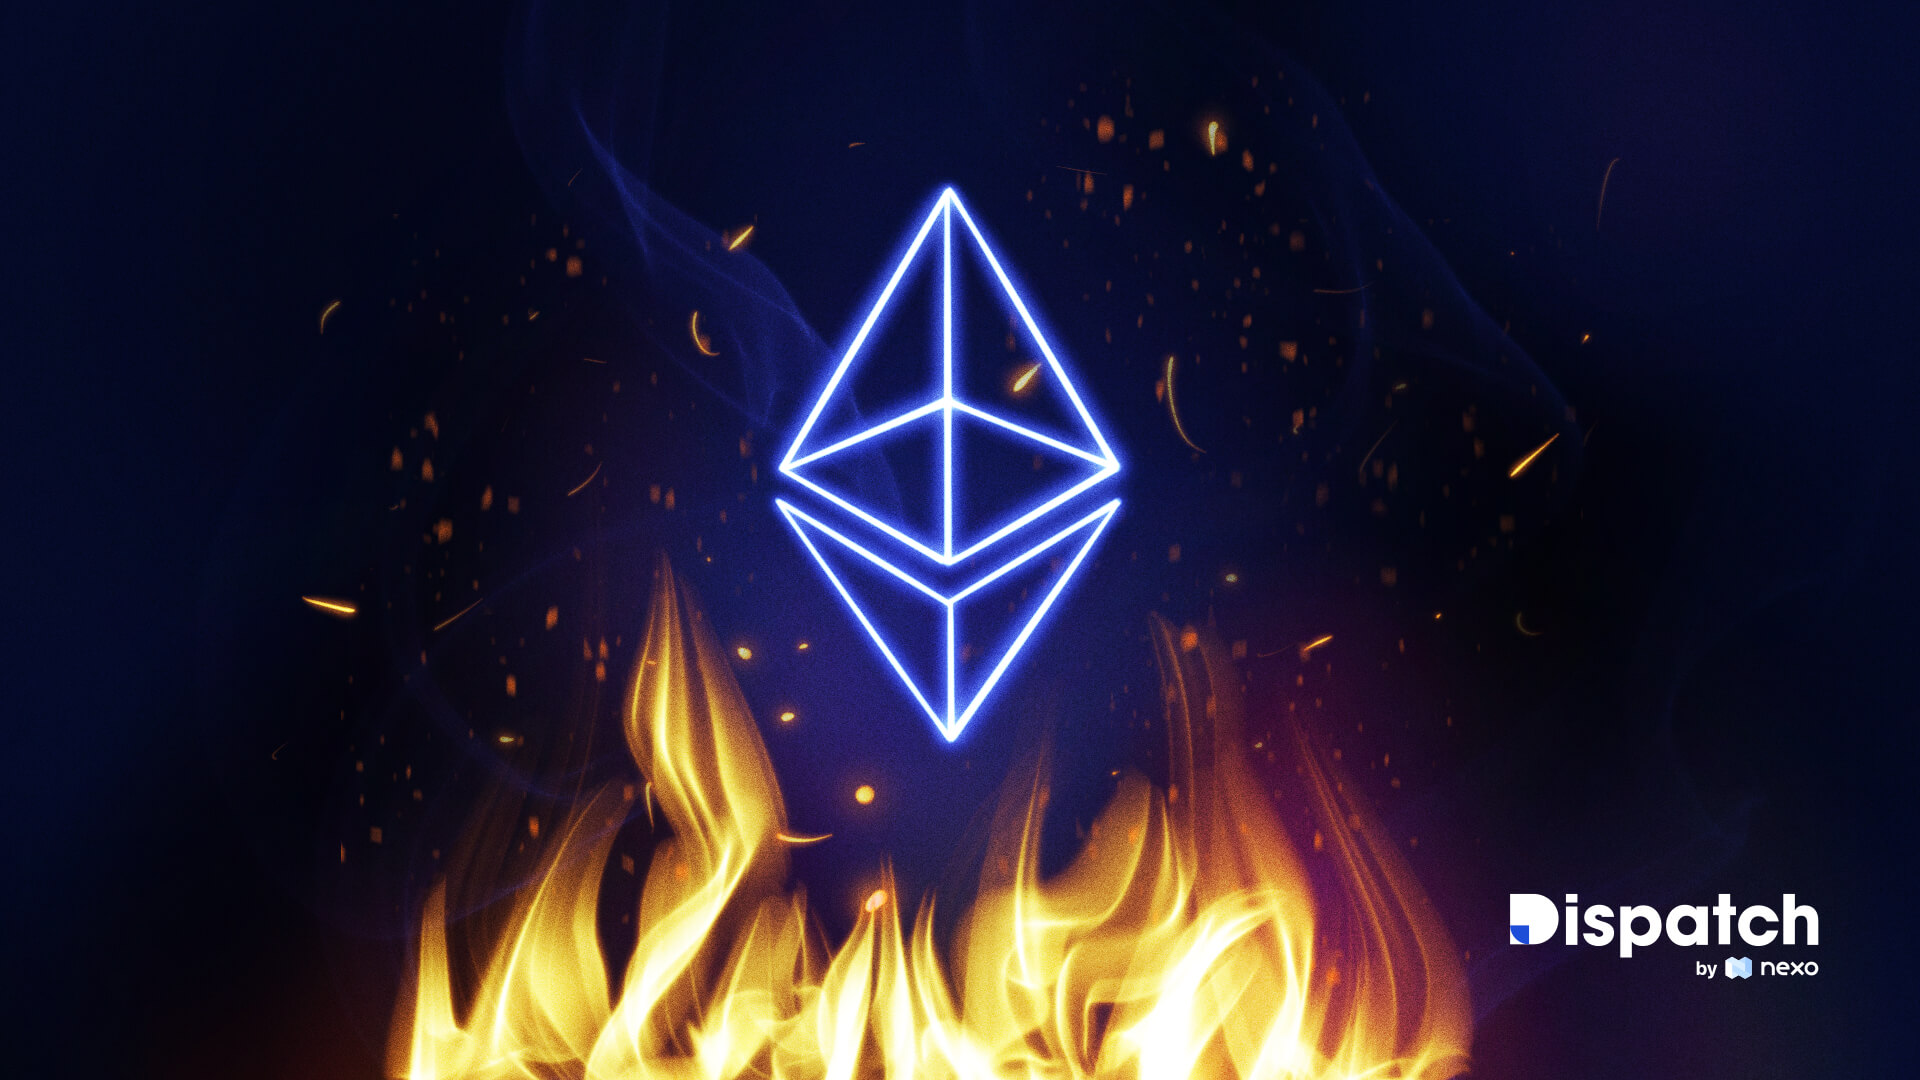 Dispatch #47: What Burning Fees Means for the Future of Ethereum